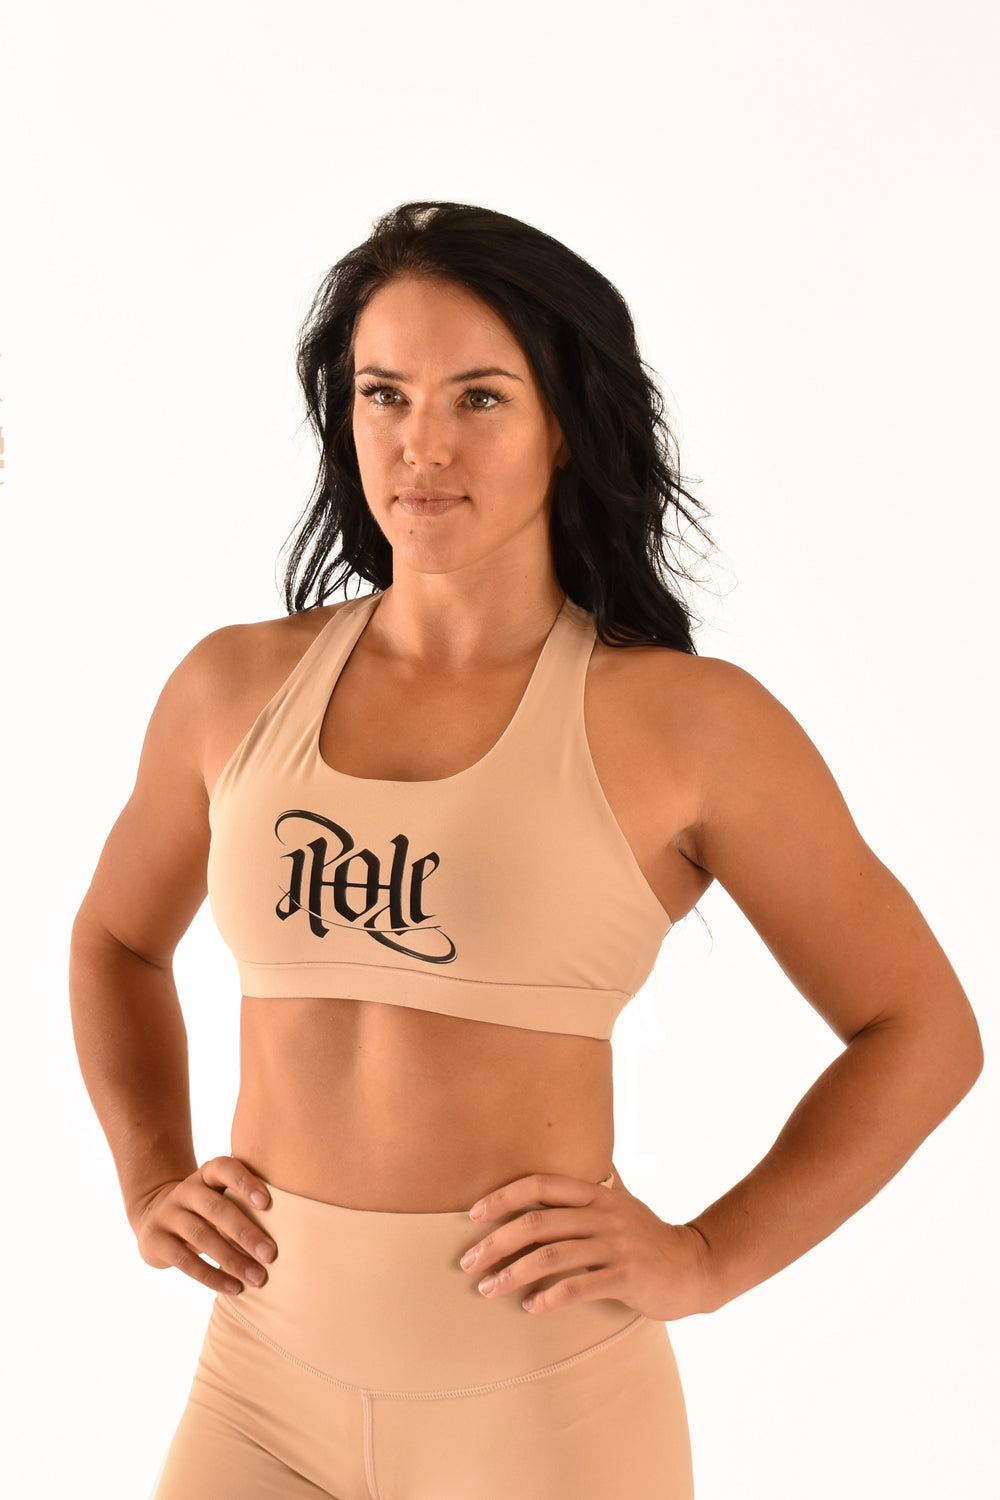 OFF THE POLE Signature Sports Bra - Latte *SIZE L ONLY*